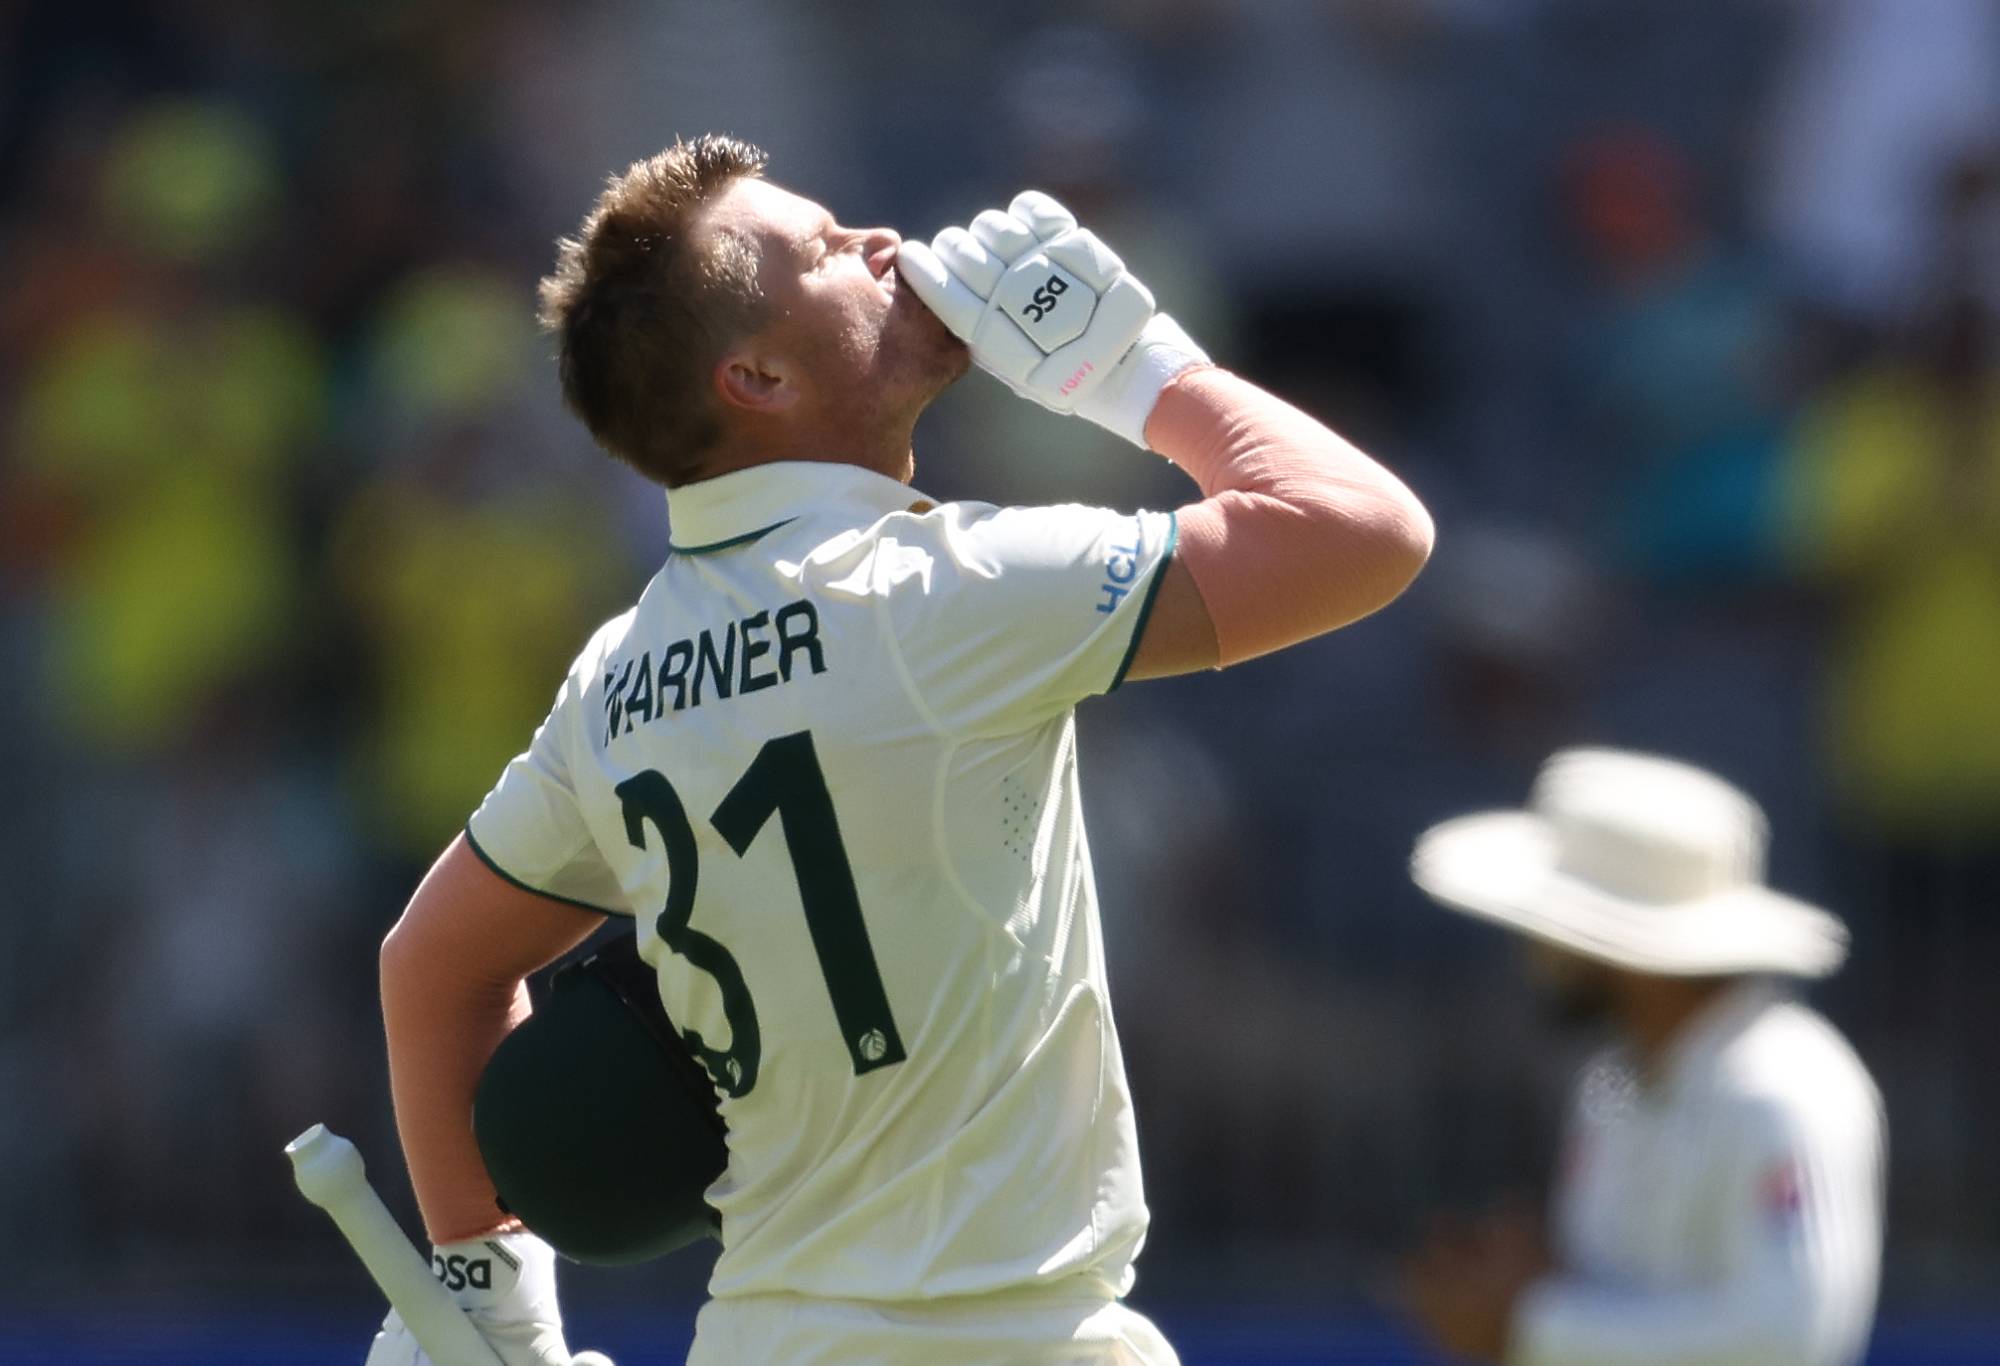 David Warner of Australia celebrates after scoring a century during day one of the Men's First Test match between Australia and Pakistan at Optus Stadium on December 14, 2023 in Perth, Australia. (Photo by Paul Kane/Getty Images)